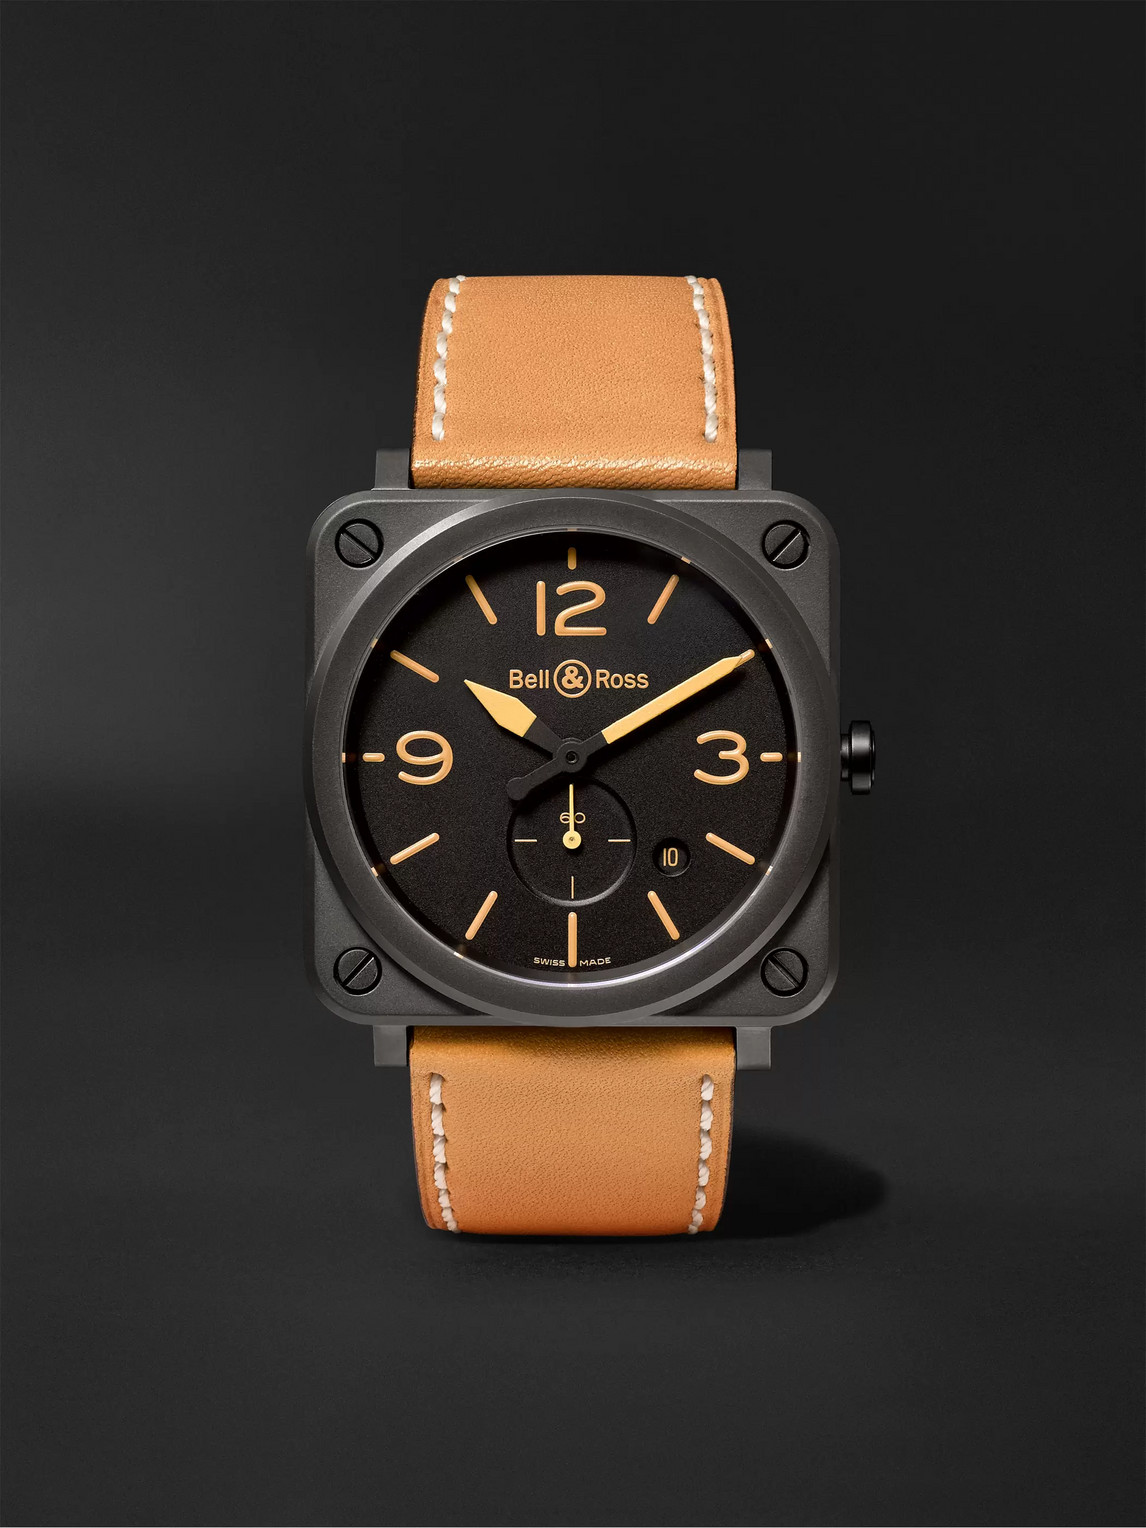 Bell & Ross Br S Heritage 39mm Ceramic And Leather Watch, Ref. No. Brs‐heri‐cem In Black